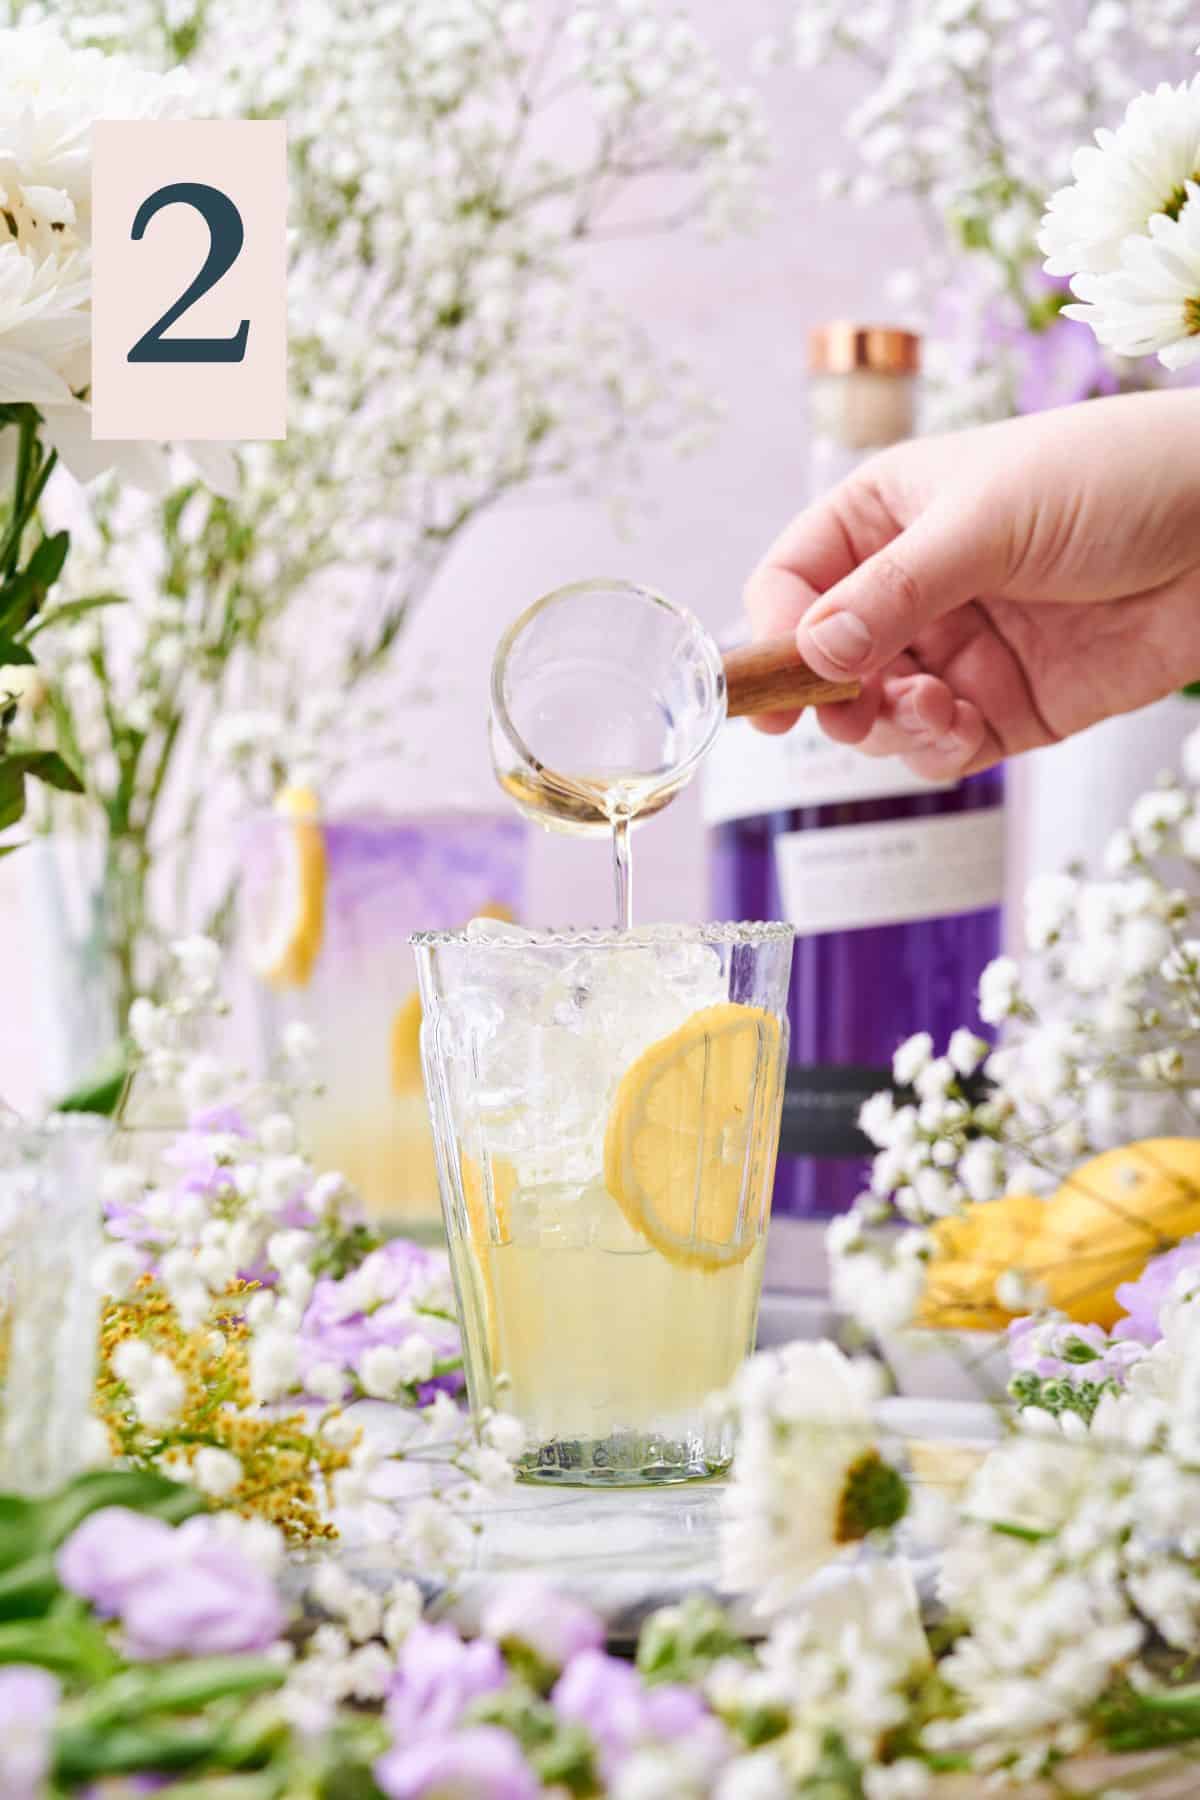 hand pouring liqueur into a glass with lemon wheels and ice surrounded by lots of white and purple flowers.